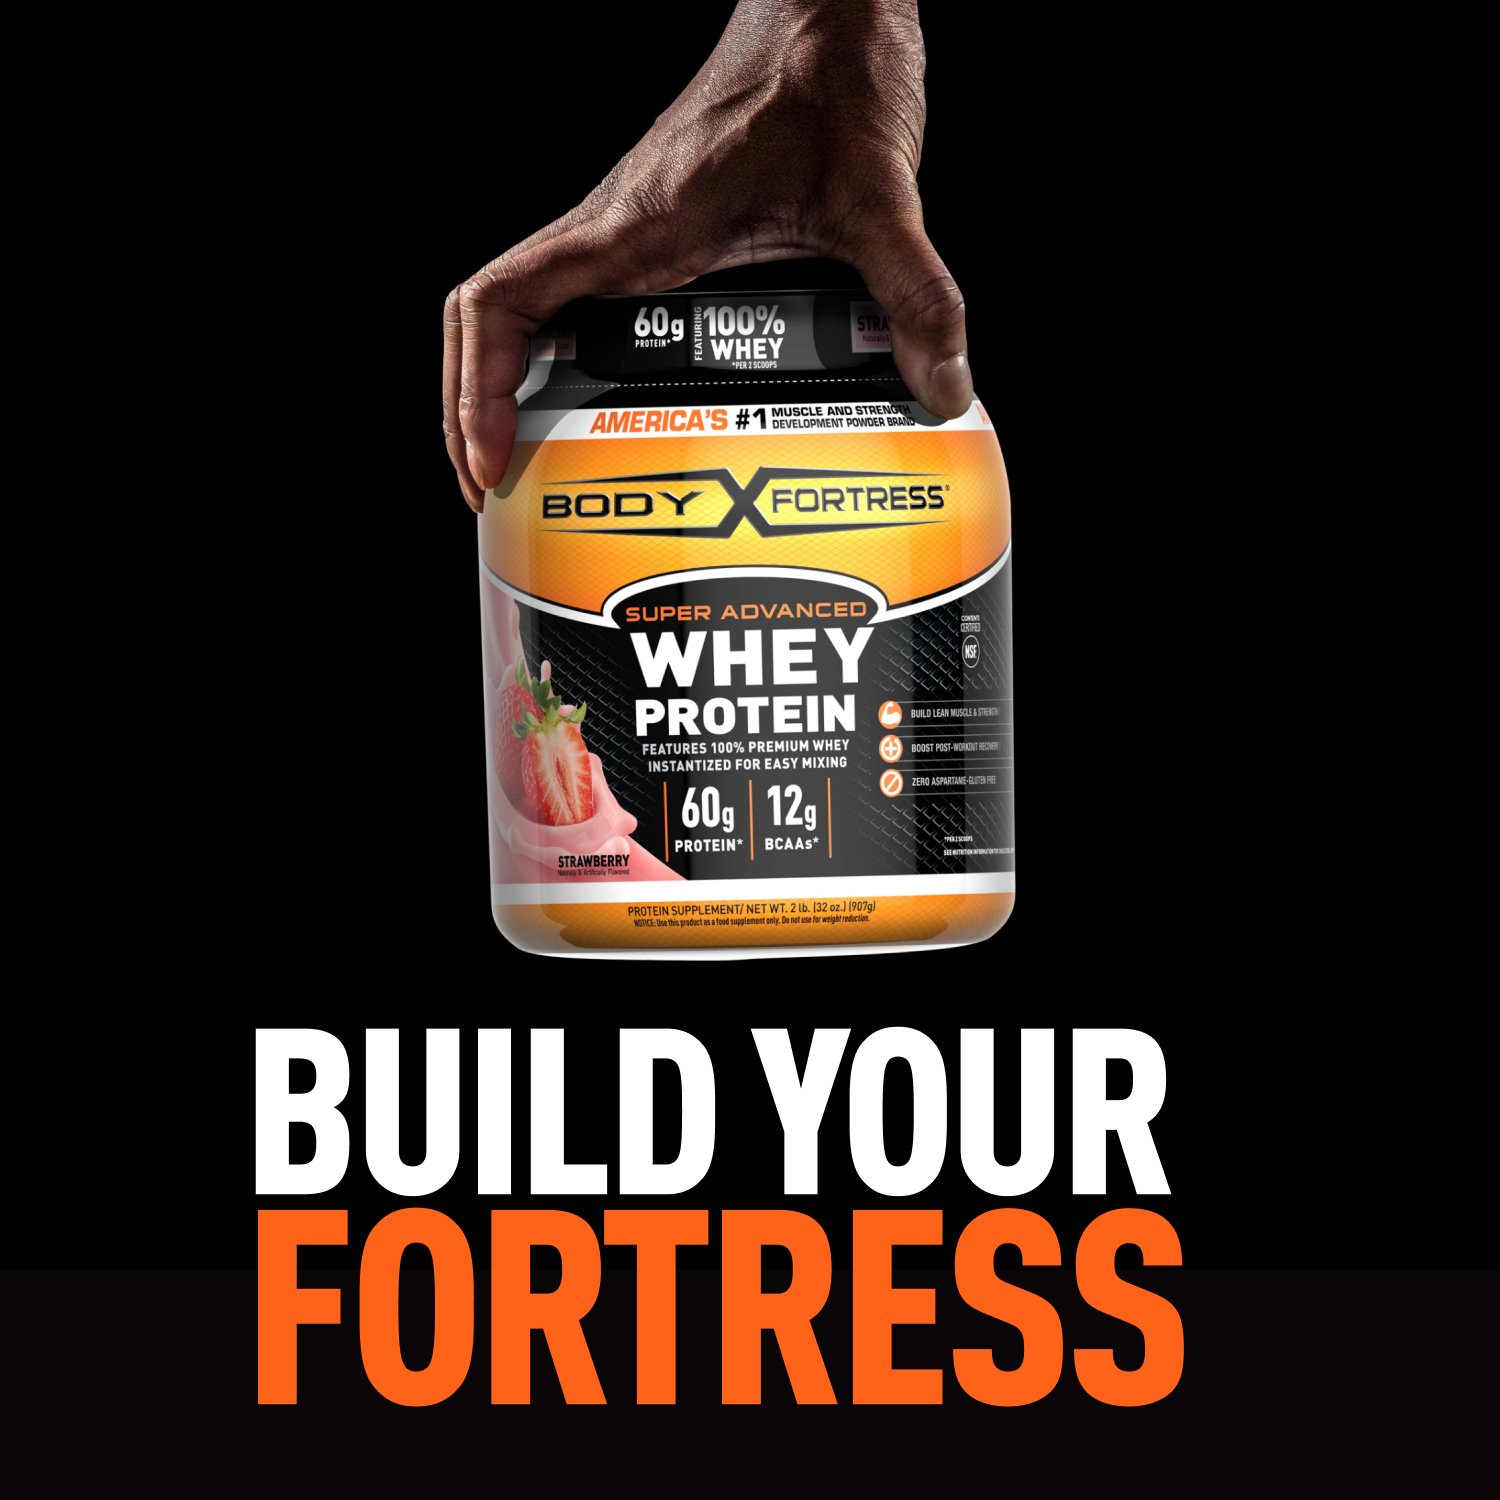 Body Fortress Whey Protein Powder, Strawberry Flavored, Gluten Free, 60 G Protein Per Serving, 2 Lbs - image 5 of 7